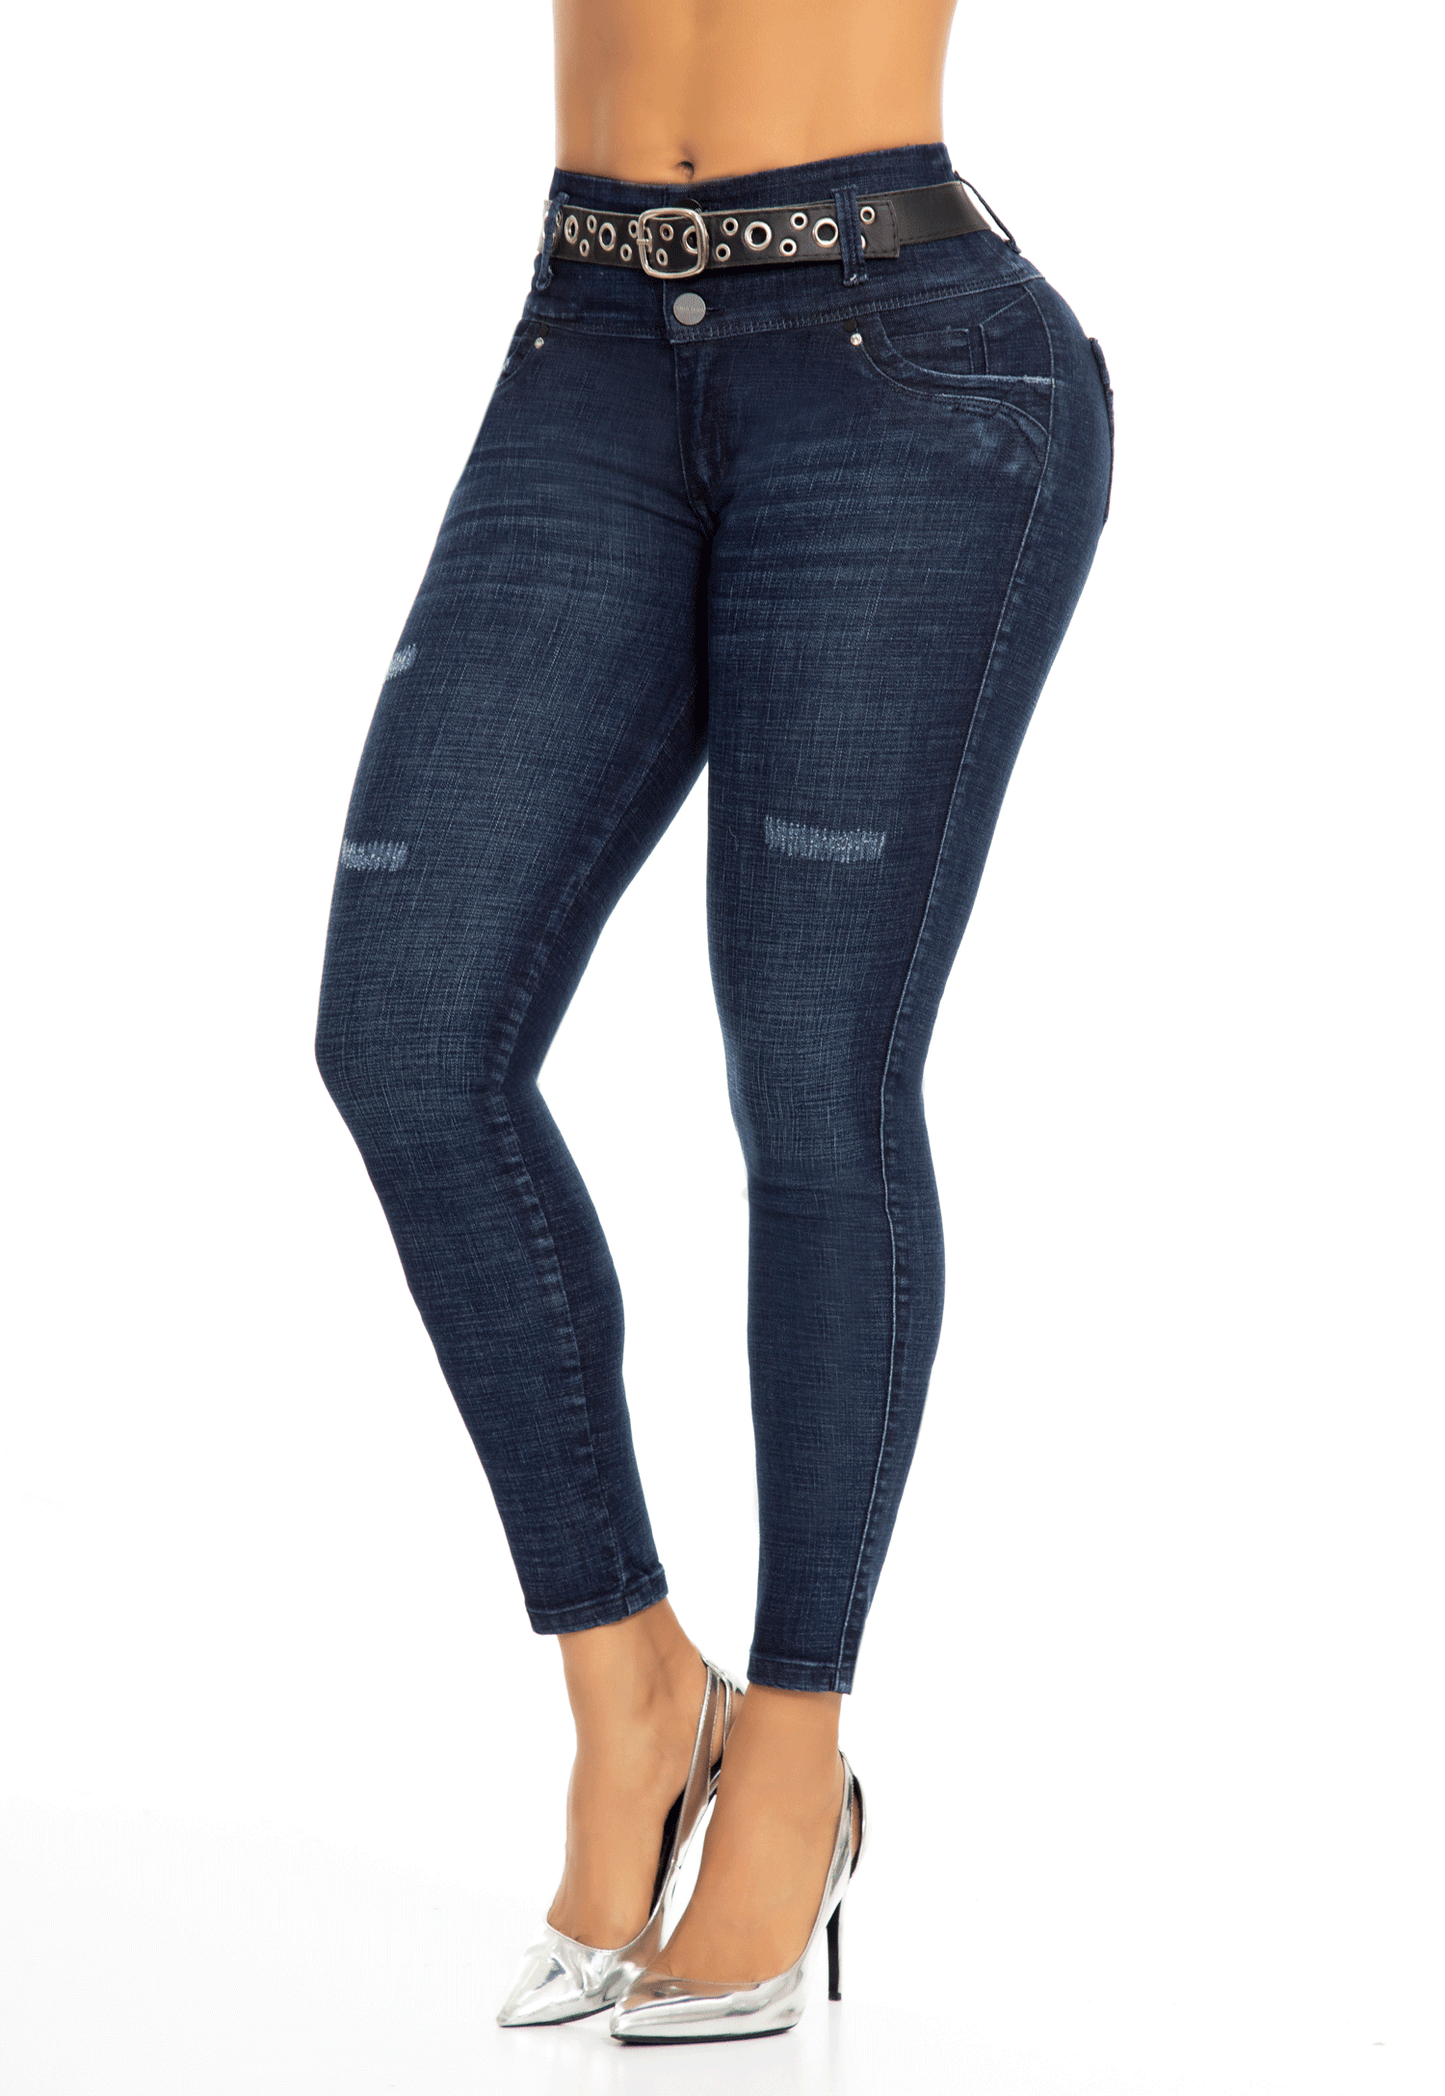 Jeans Colombia Azul 6822